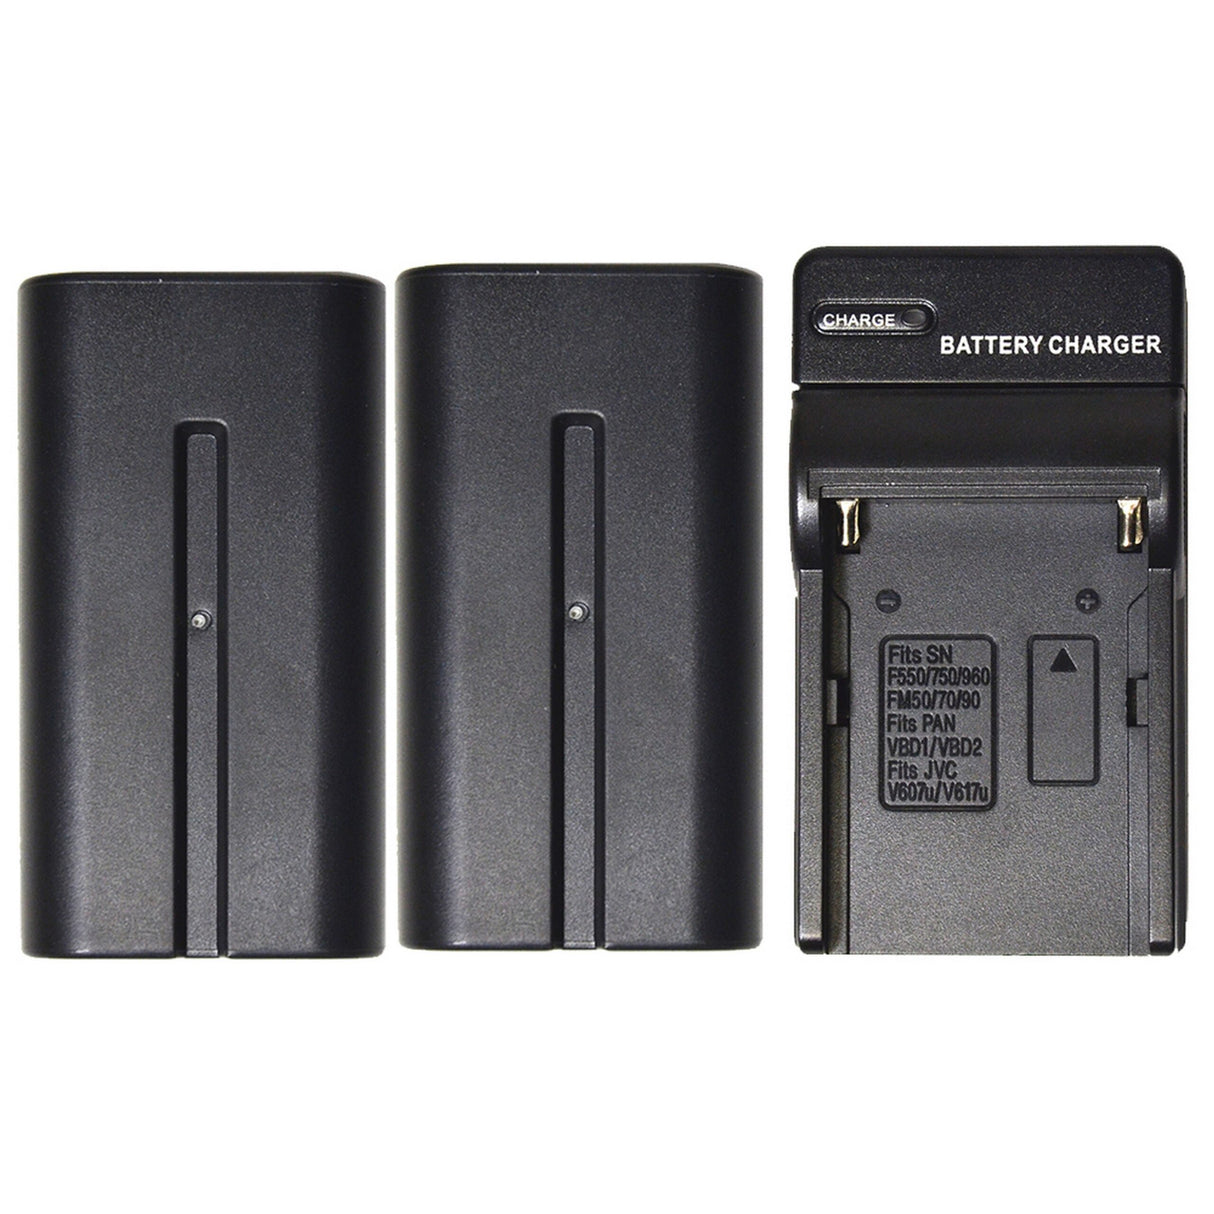 Savage BNP-F750 Lithium-Ion Battery 2 Pack and Charger